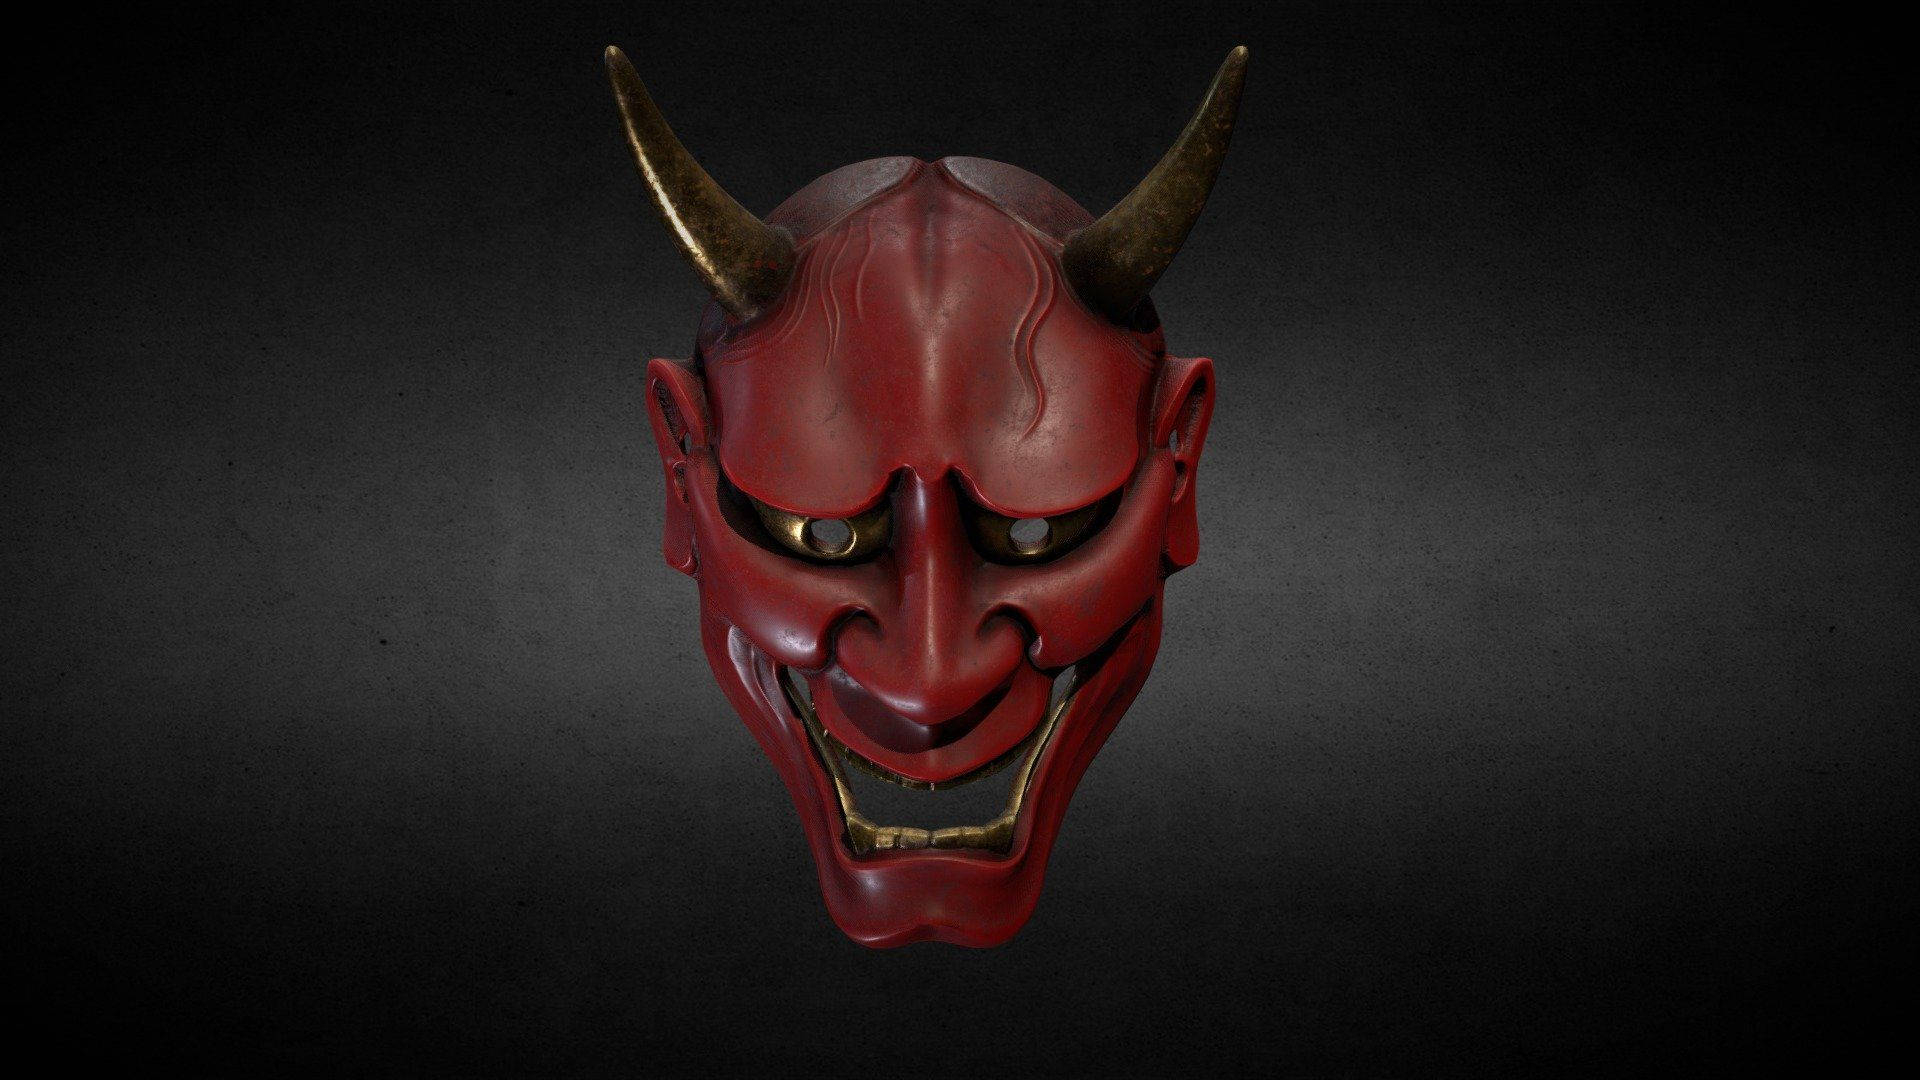 1920x1080 Download Red Oni Mask Wallpaper